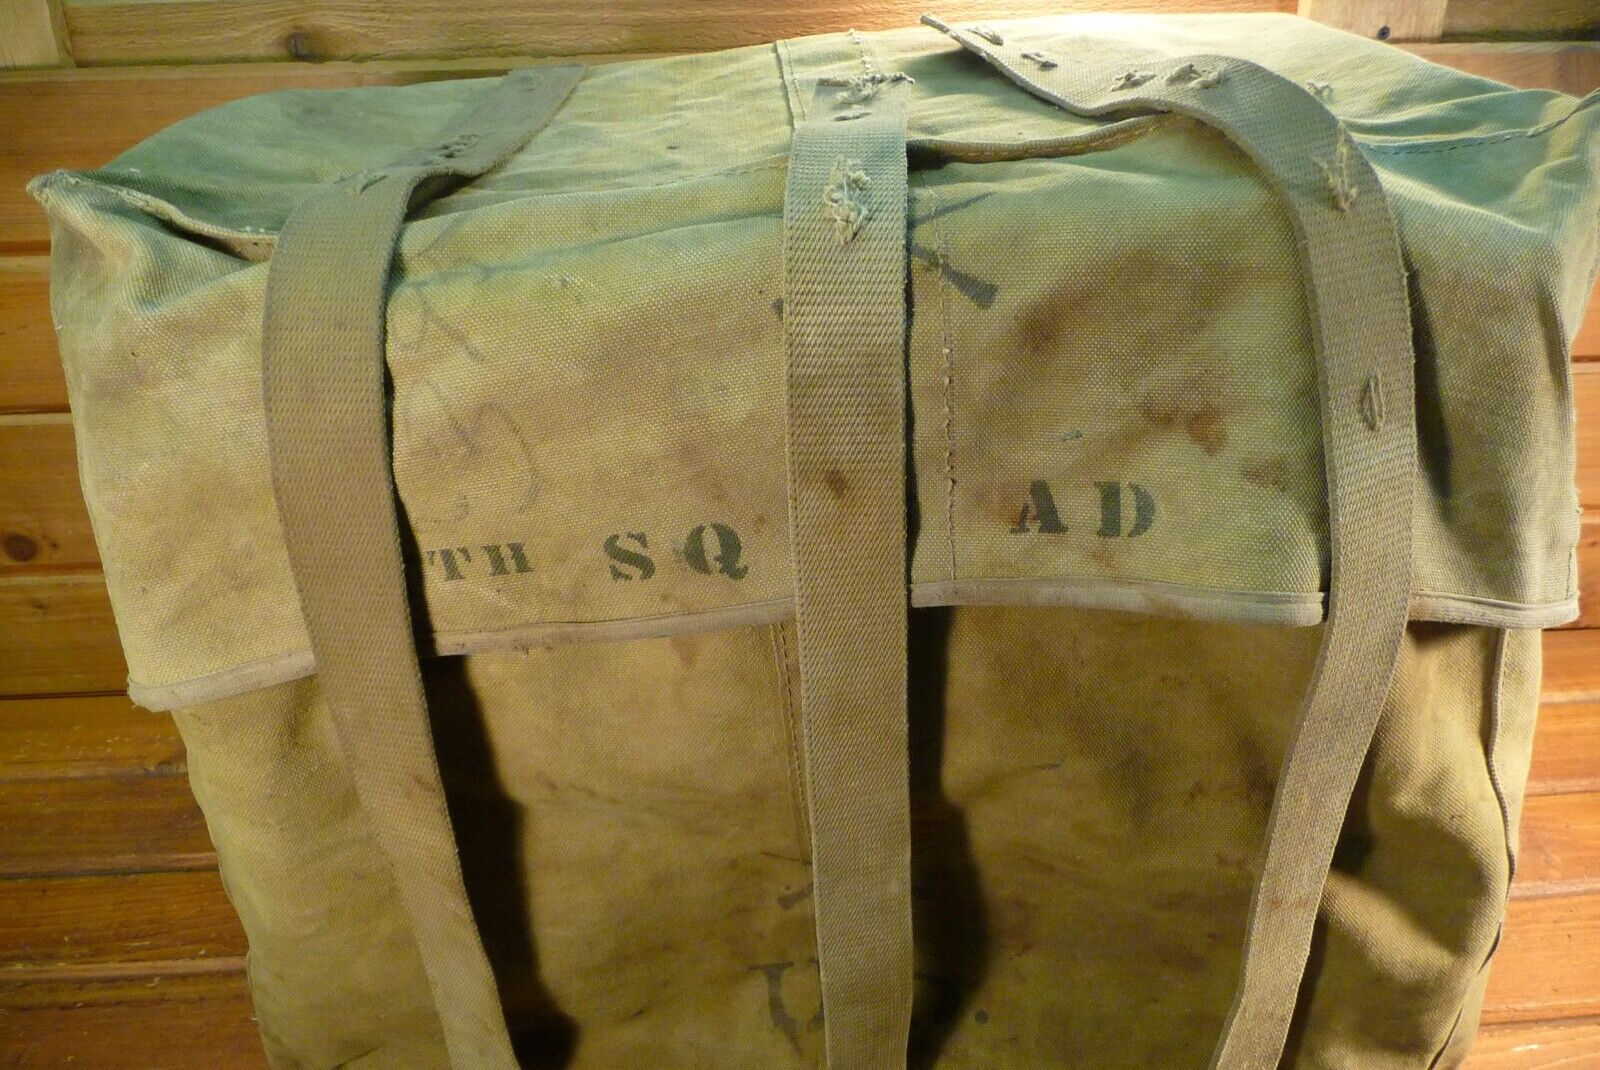 Large Vintage US Army Canvas Bag Cargo 7th Squad Infantry Crossed Rifle Insignia